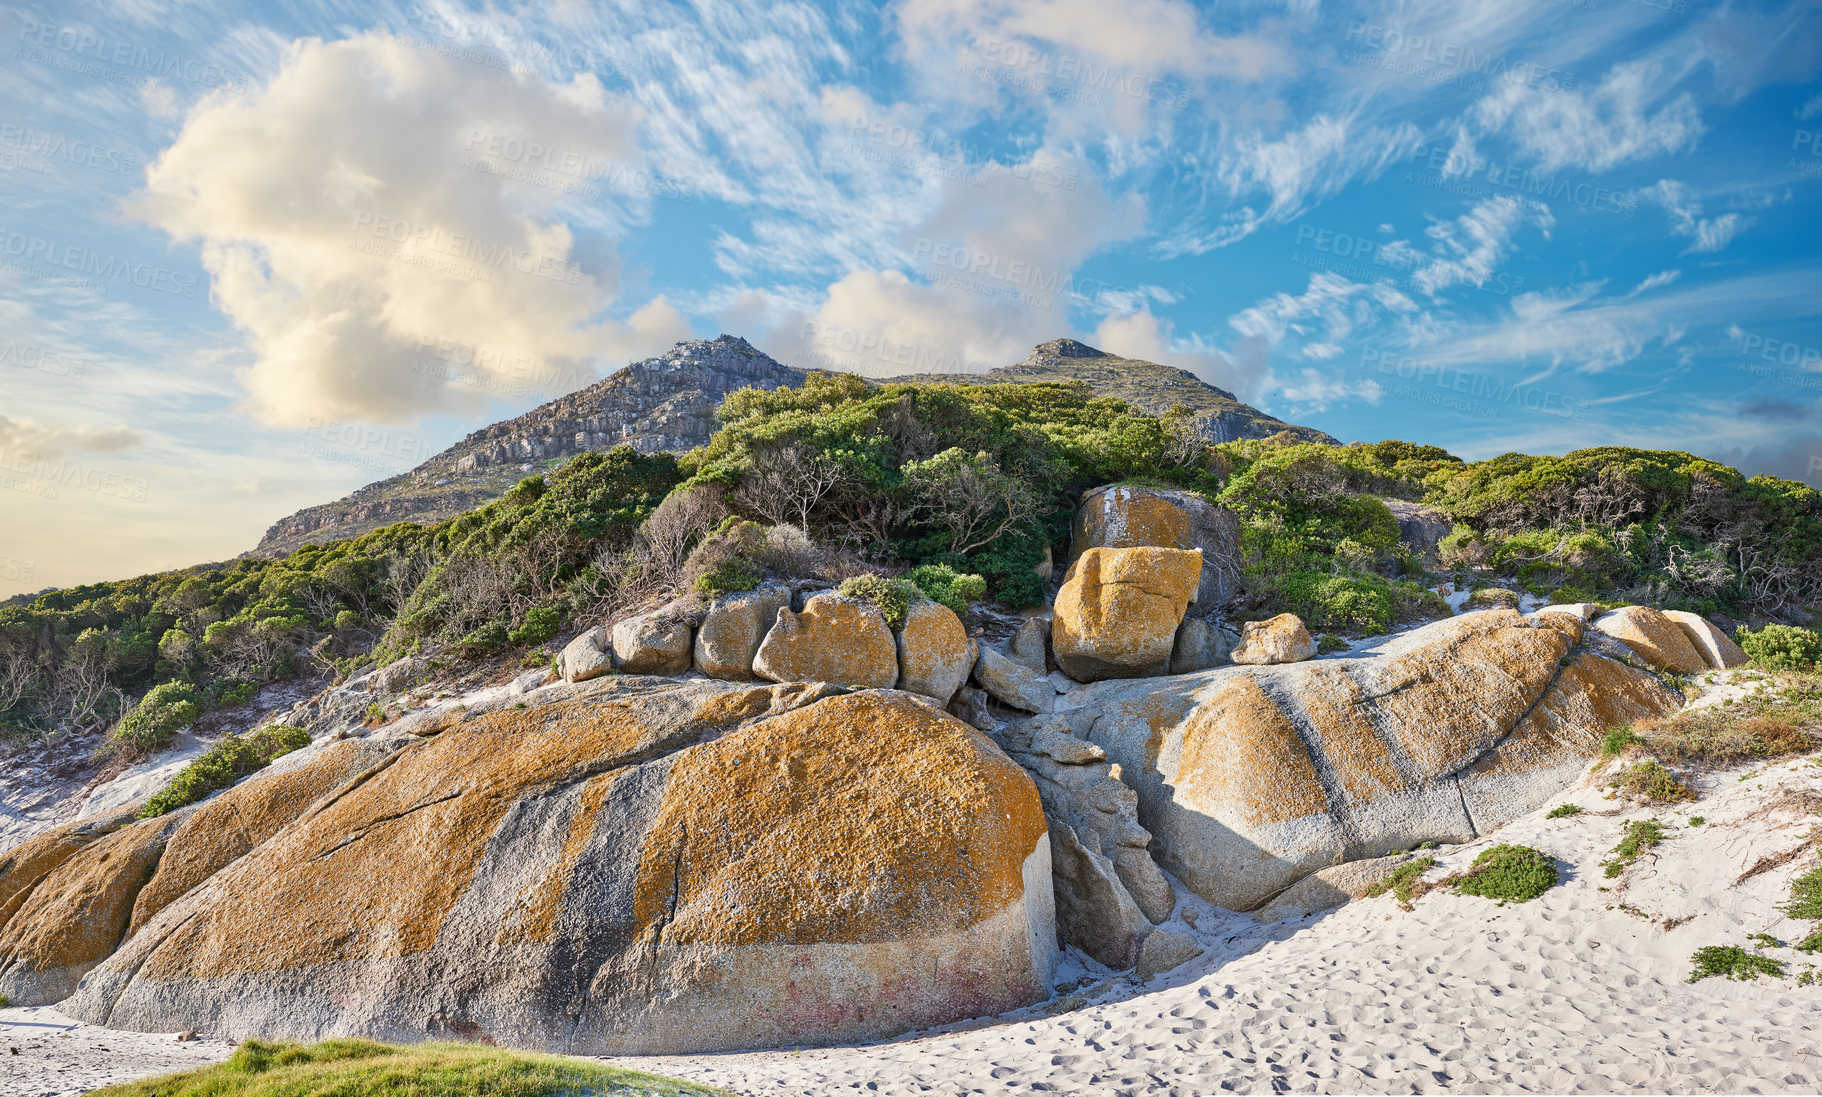 Buy stock photo Rocks and boulders on a coastal shore against a mountain background with lush green plants and shrubs below a cloudy blue sky. Beautiful view and tourist attraction in Cape Town, South Africa